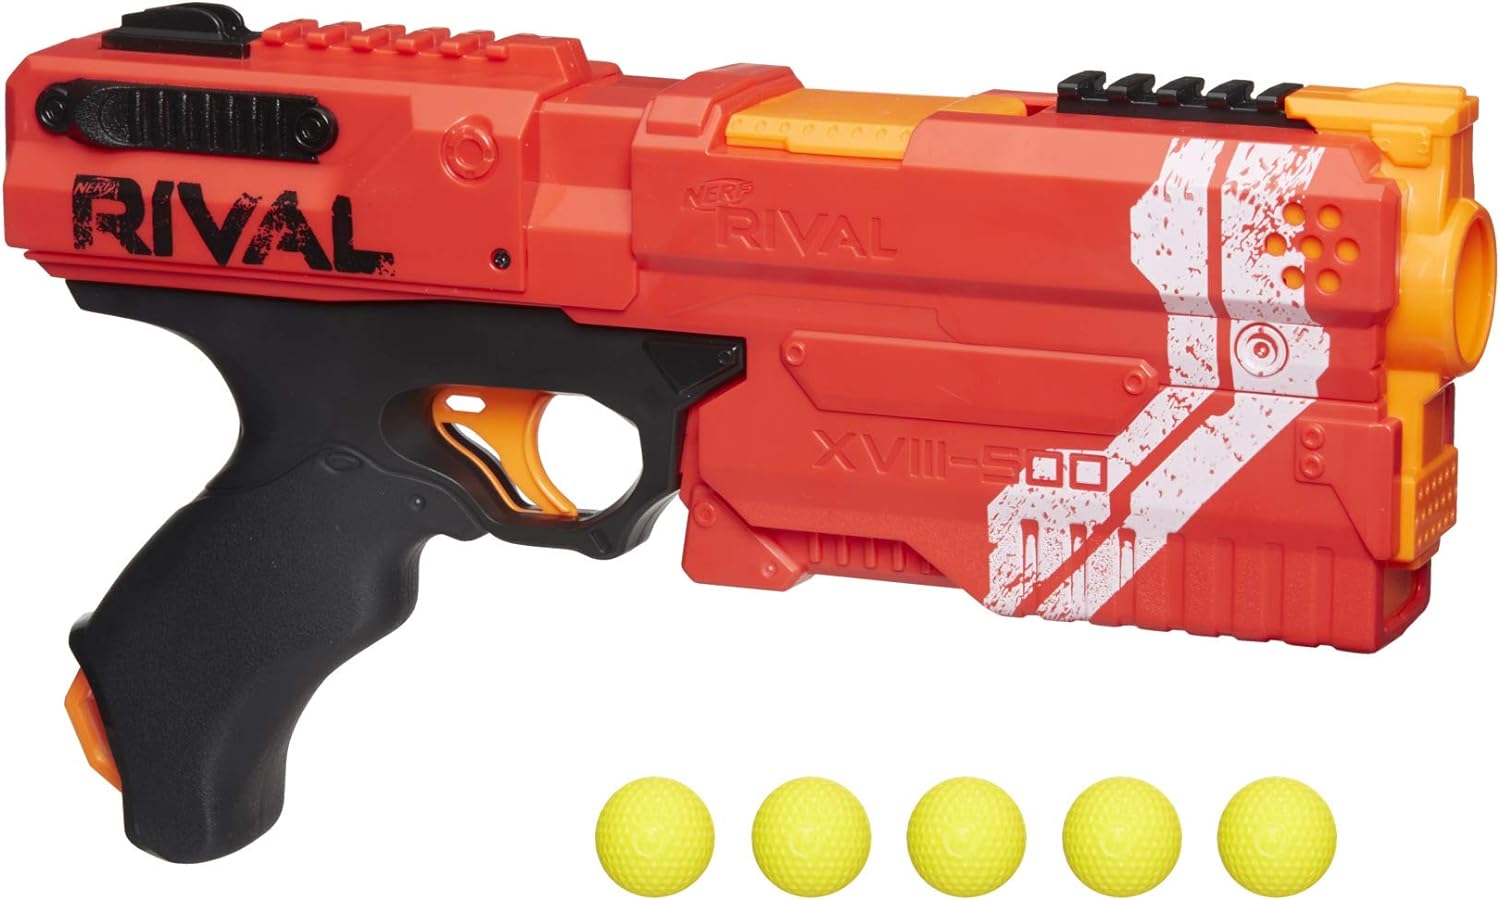 NERF Rival Kronos XVIII-500 Blaster, Breech-Load, 5 Rival Rounds, Spring Action, 90 FPS Velocity, Red (Amazon Exclusive)